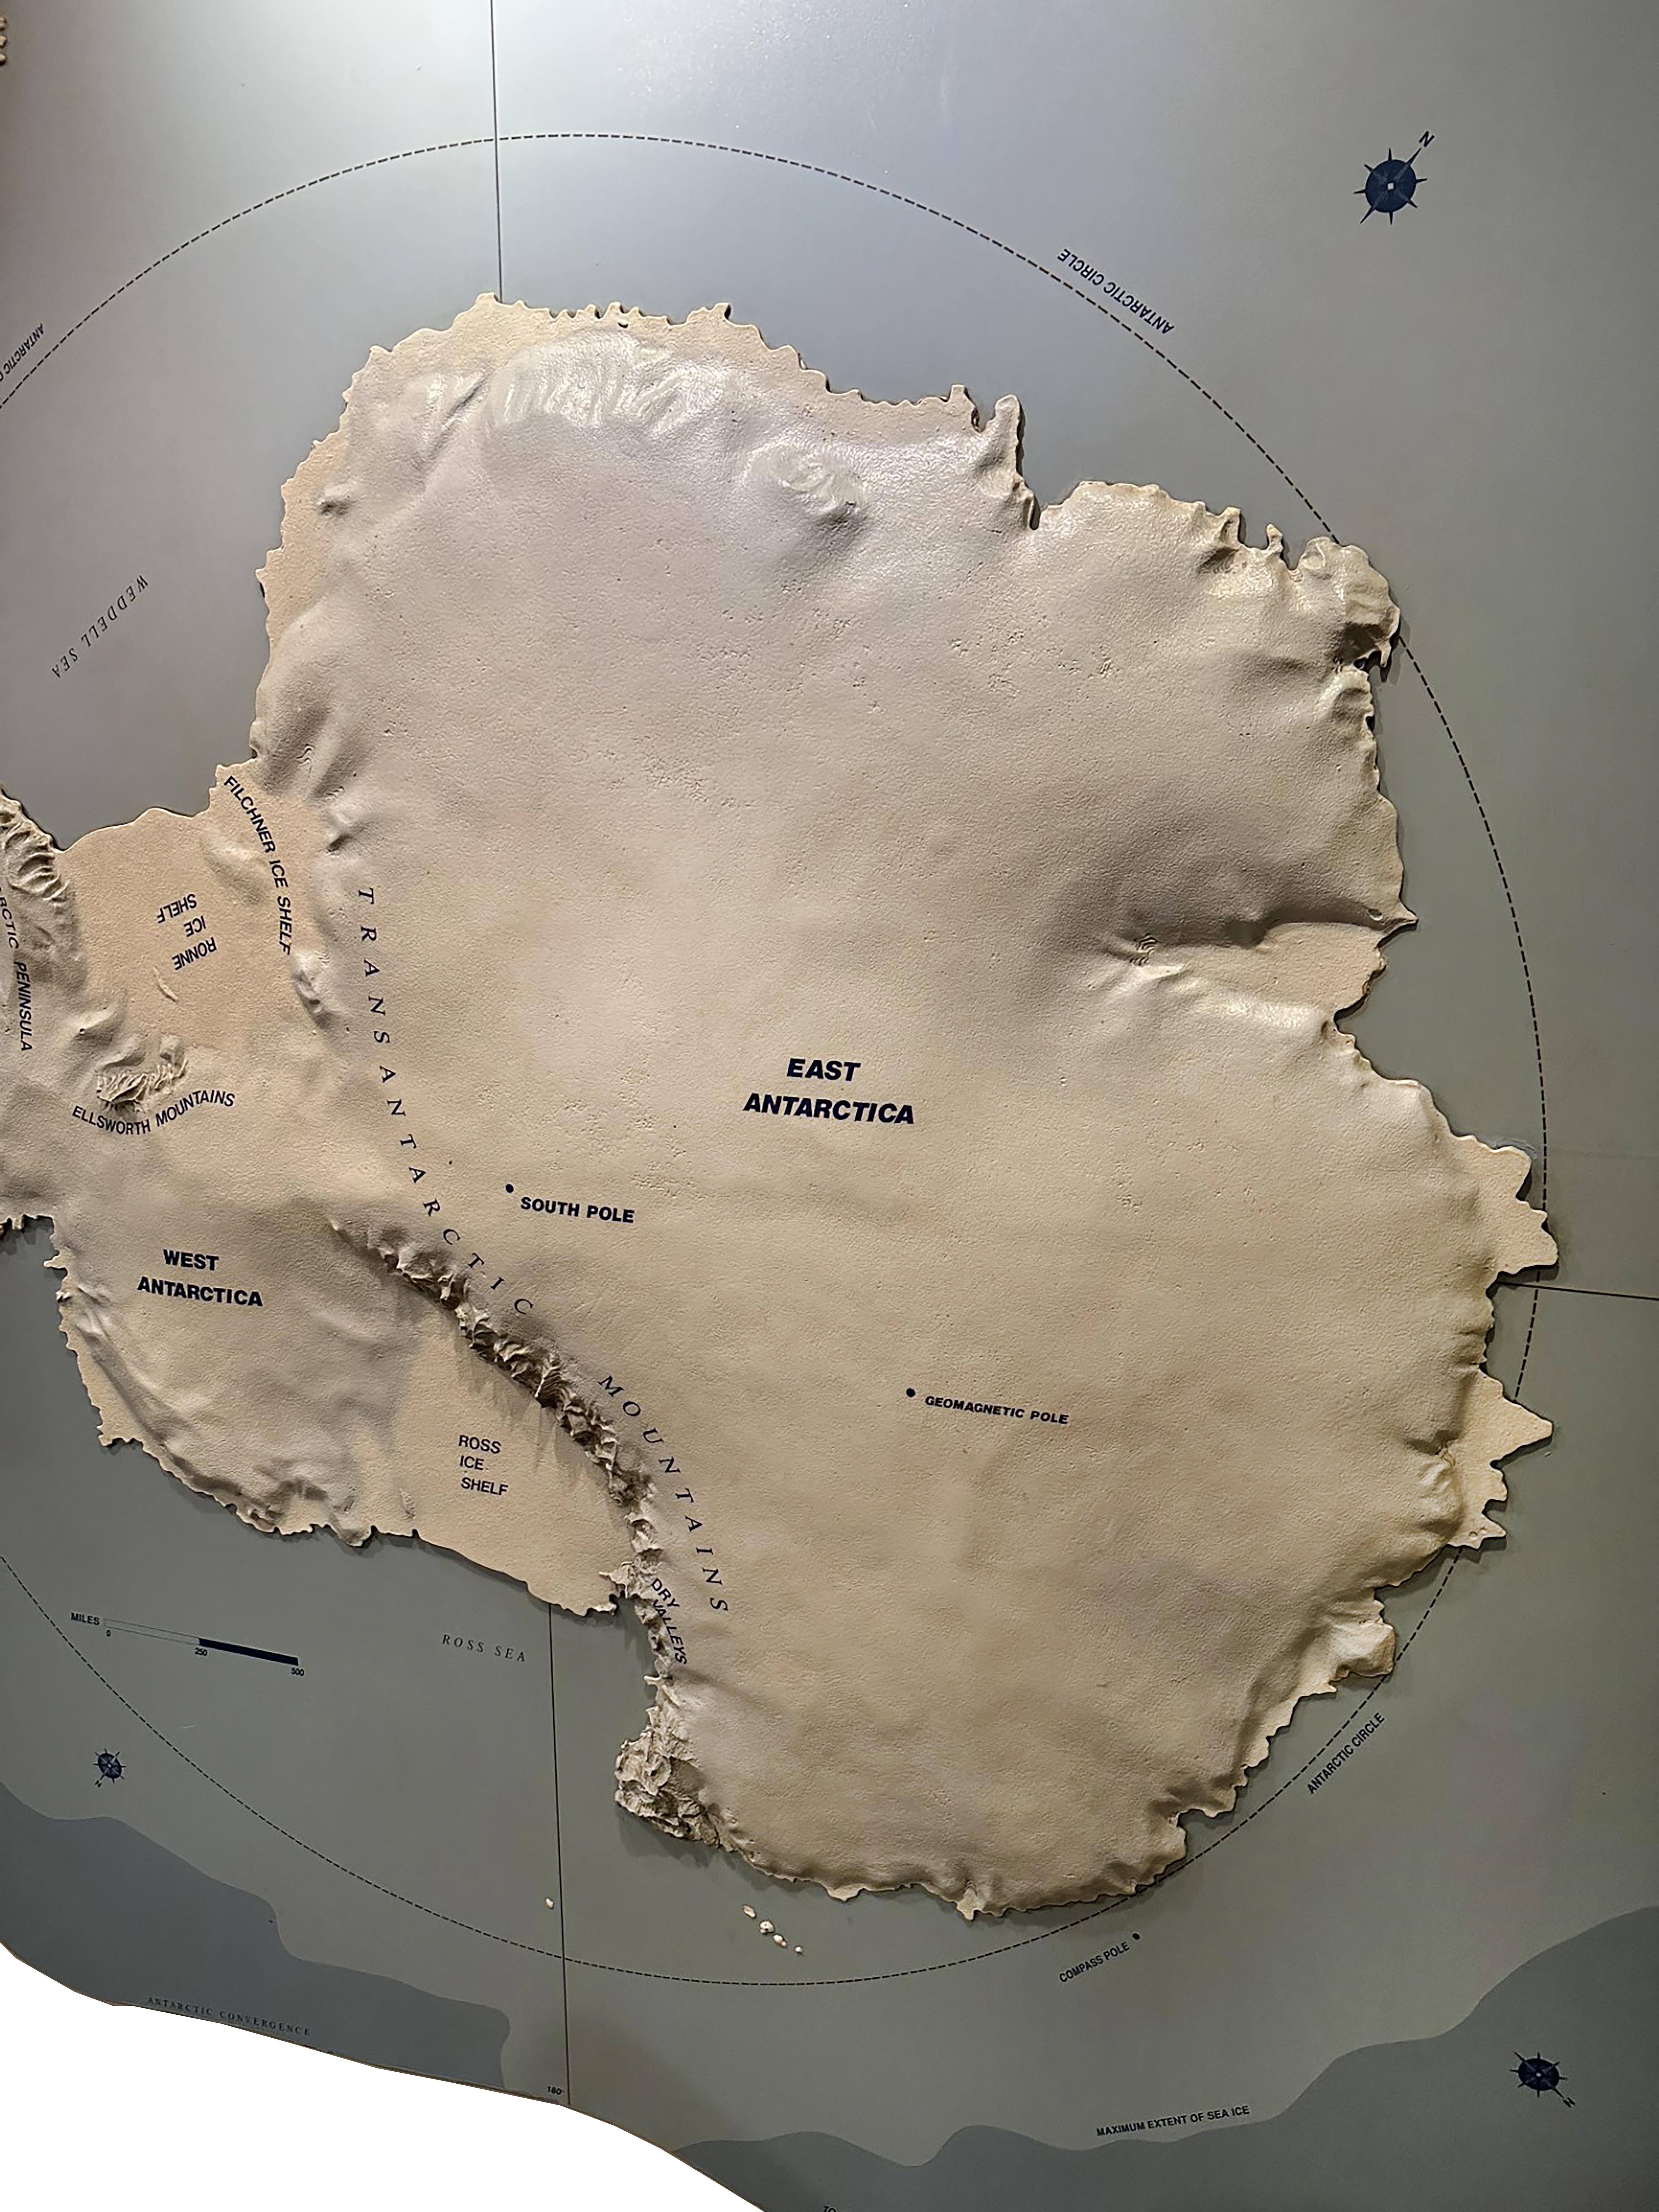 An amazing topographic wall mounted three-dimensional map of Antarctica. Midcentury. This incredible map shows off elevation, ice shelves, and scale of the continent. Some texts show off different locations and orientations. Sea depth is also